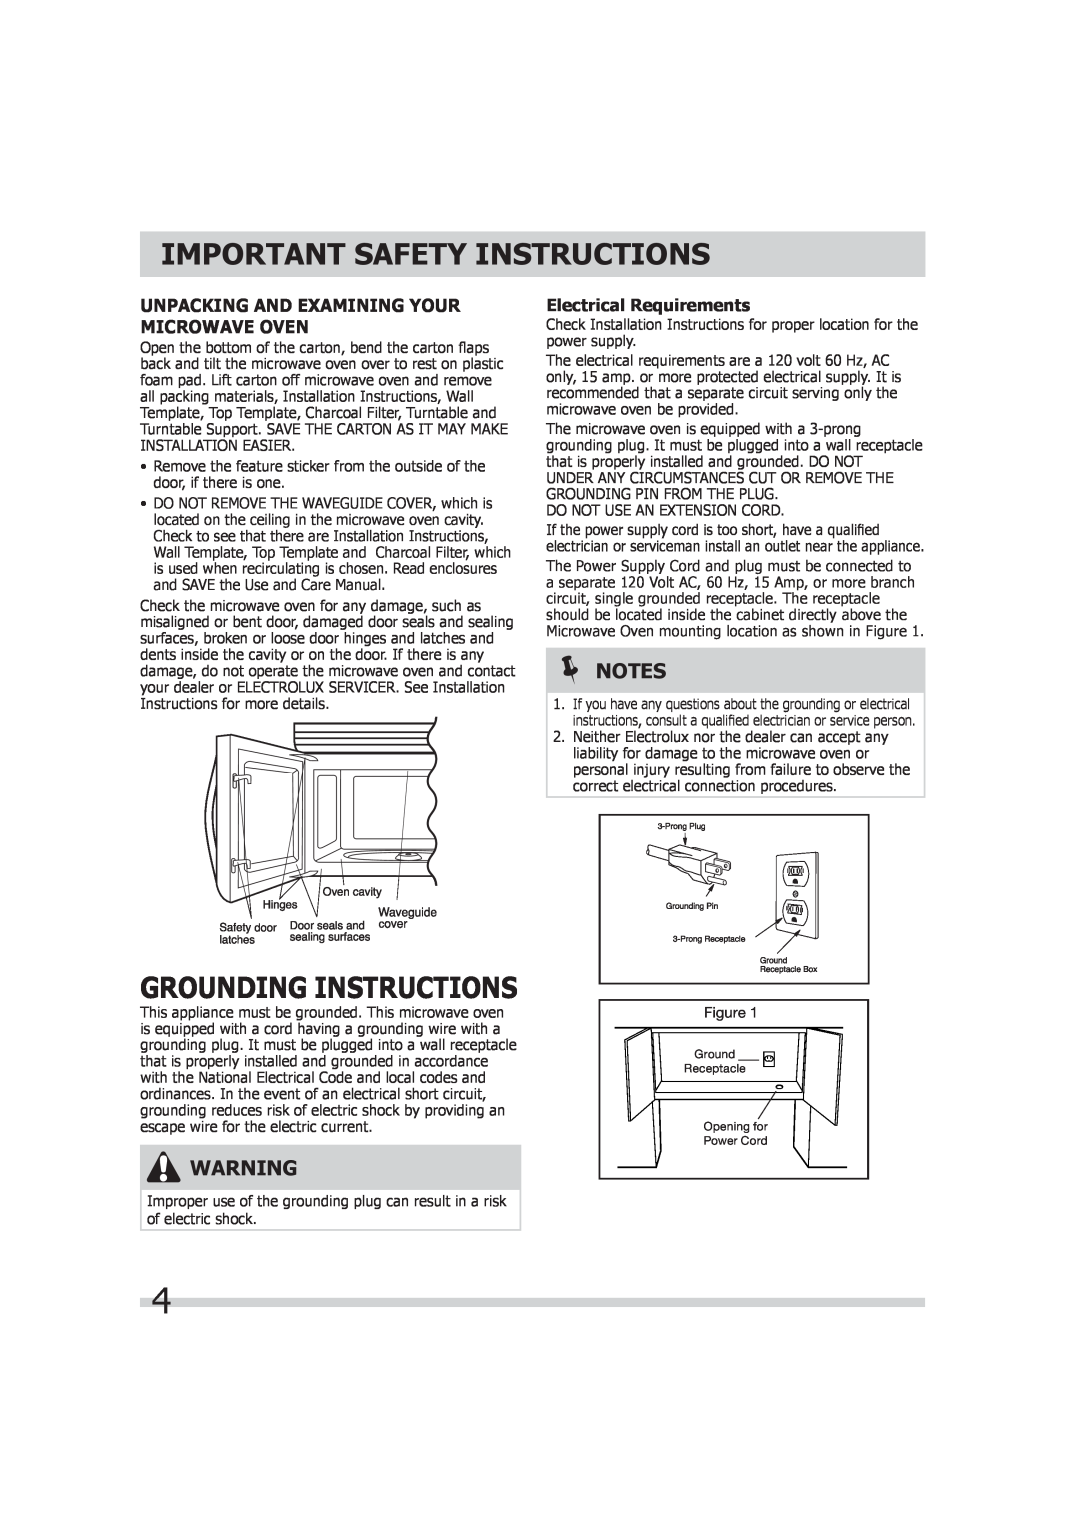 Frigidaire FGMV173KB Unpacking And Examining Your Microwave Oven, Electrical Requirements, Important Safety Instructions 